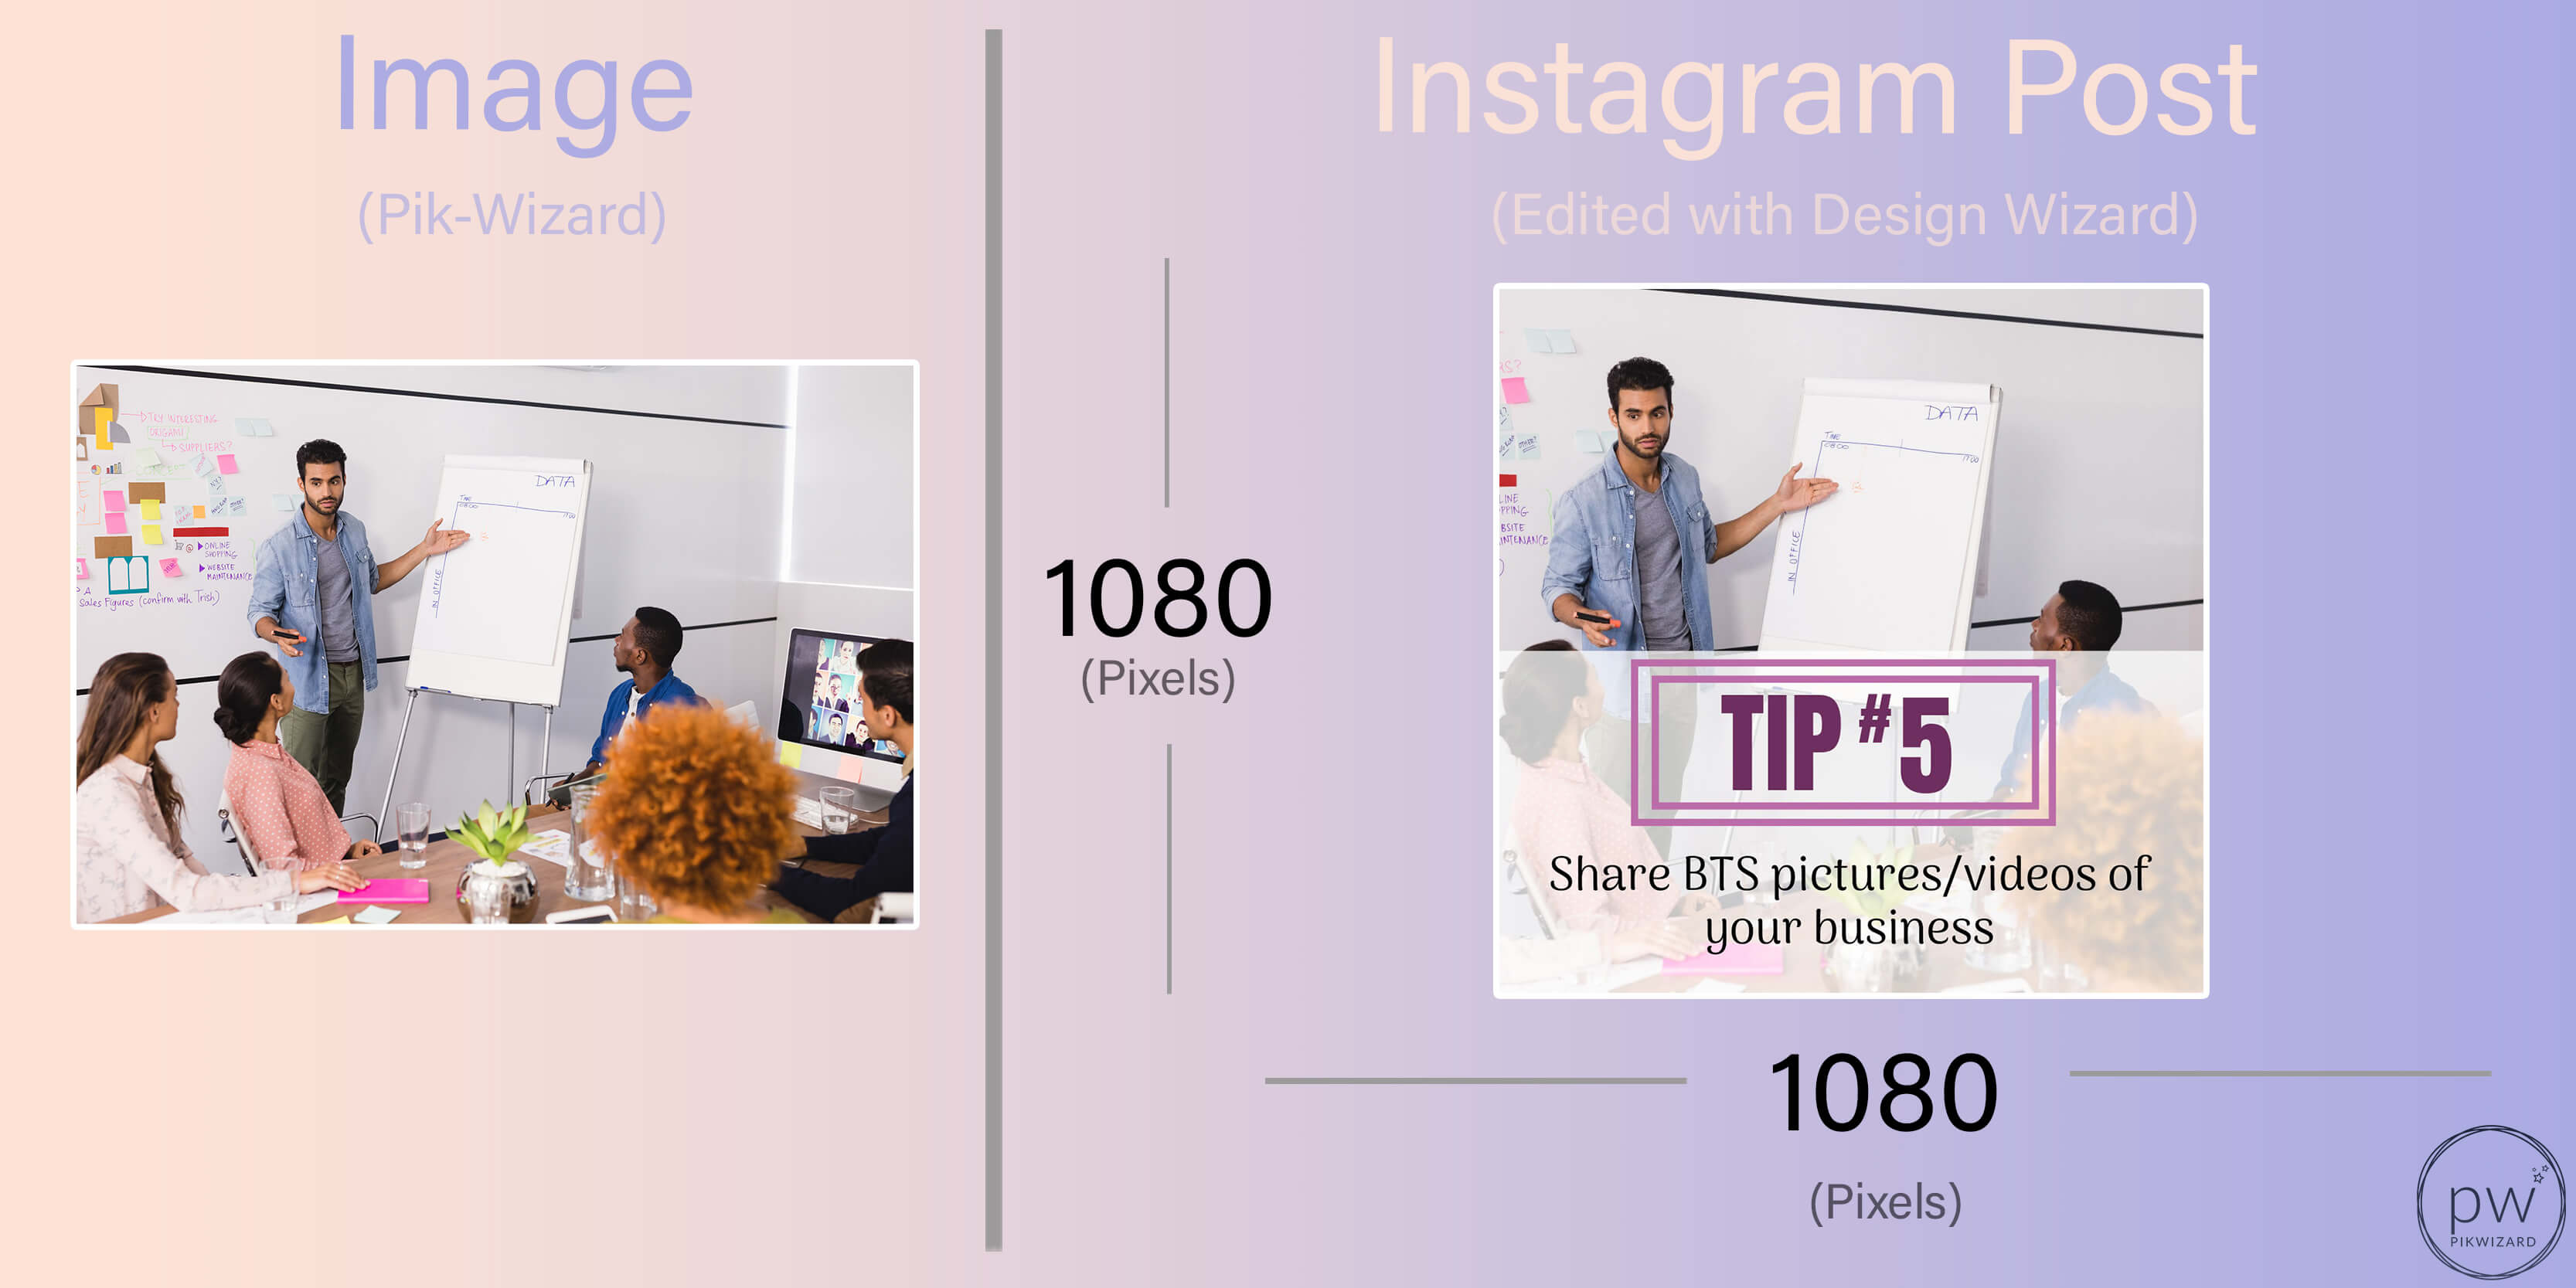 Side by side stock image and edited instagram post for business tips - A complete beginner's guide on how to post on Instagram from a PC or Mac - Image